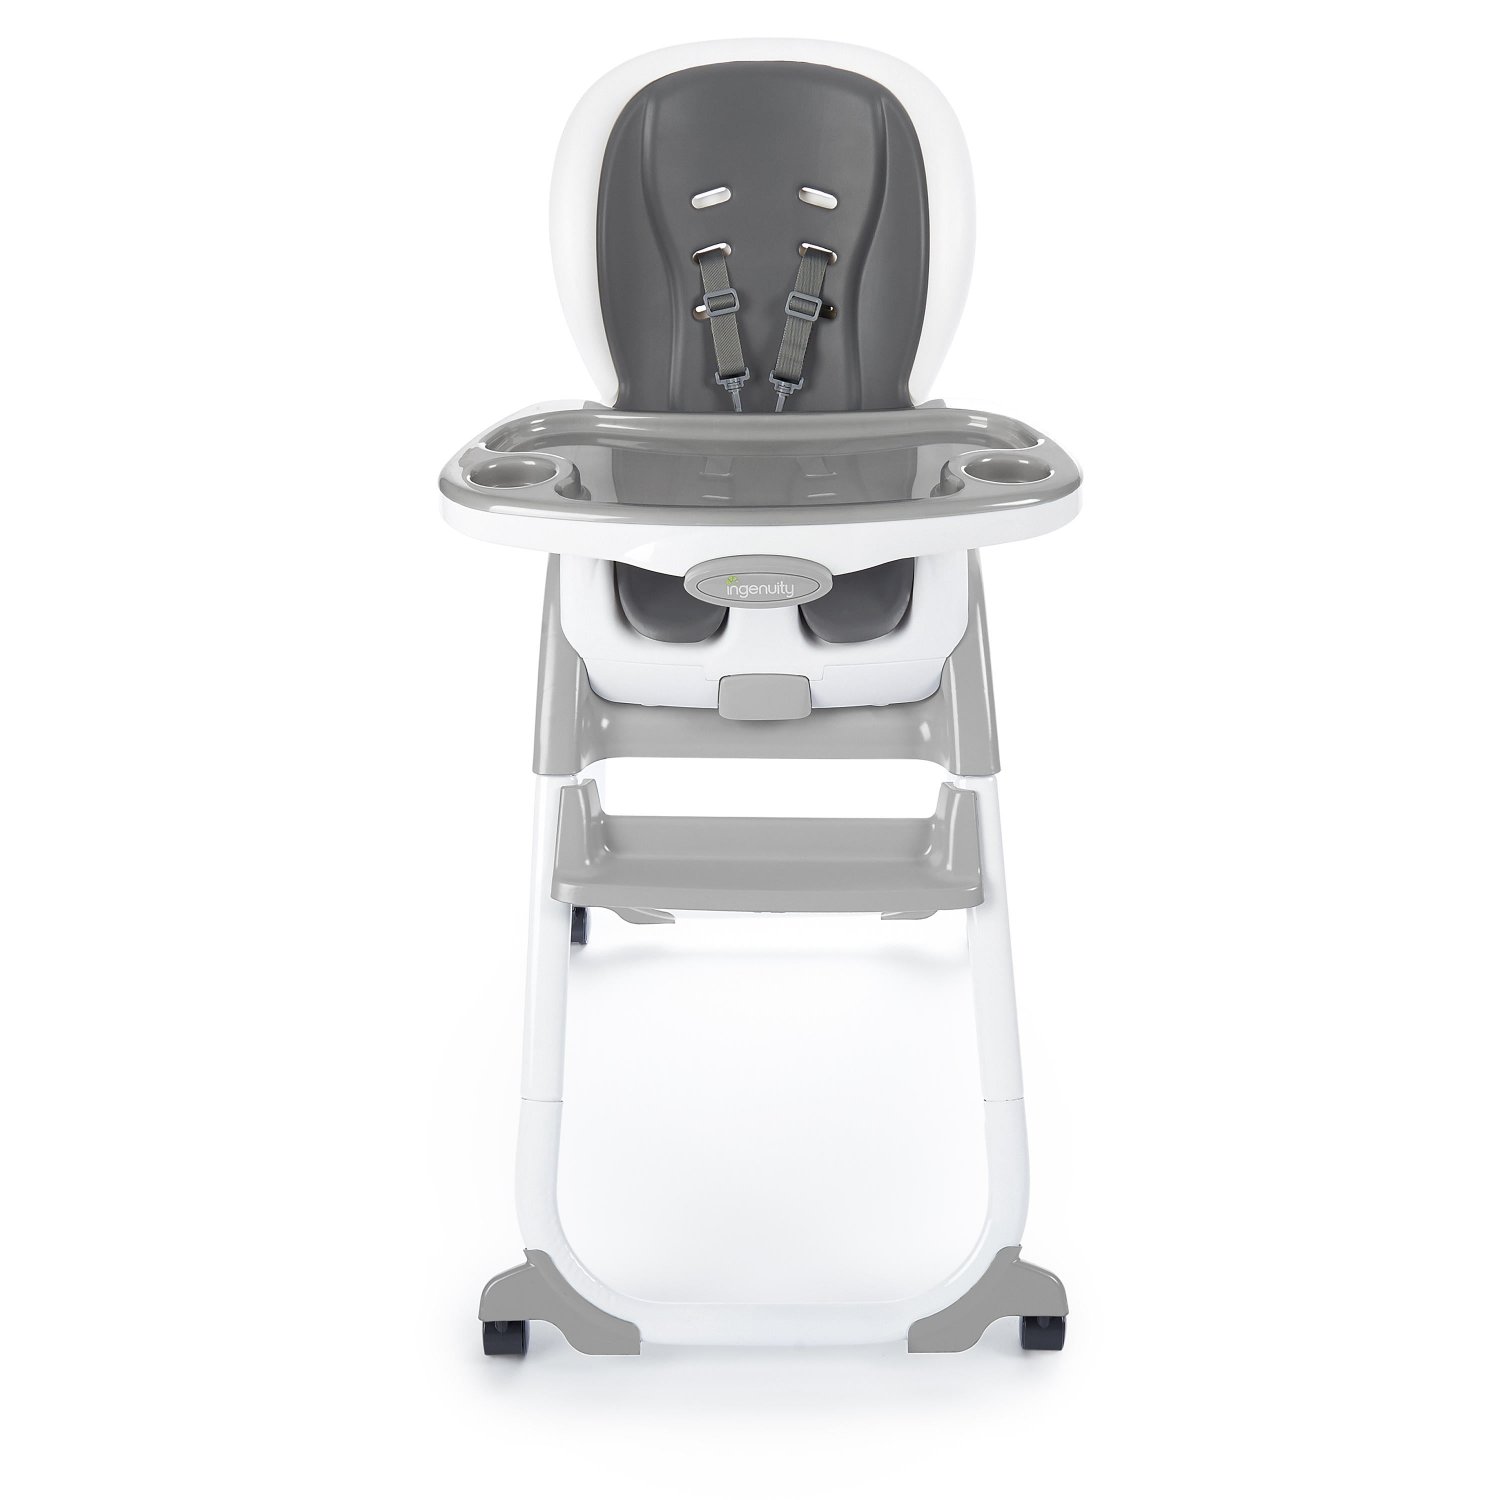 Ingenuity SmartClean Trio Elite 3-in-1 Convertible High Chair, Toddler Chair, and Booster Seat